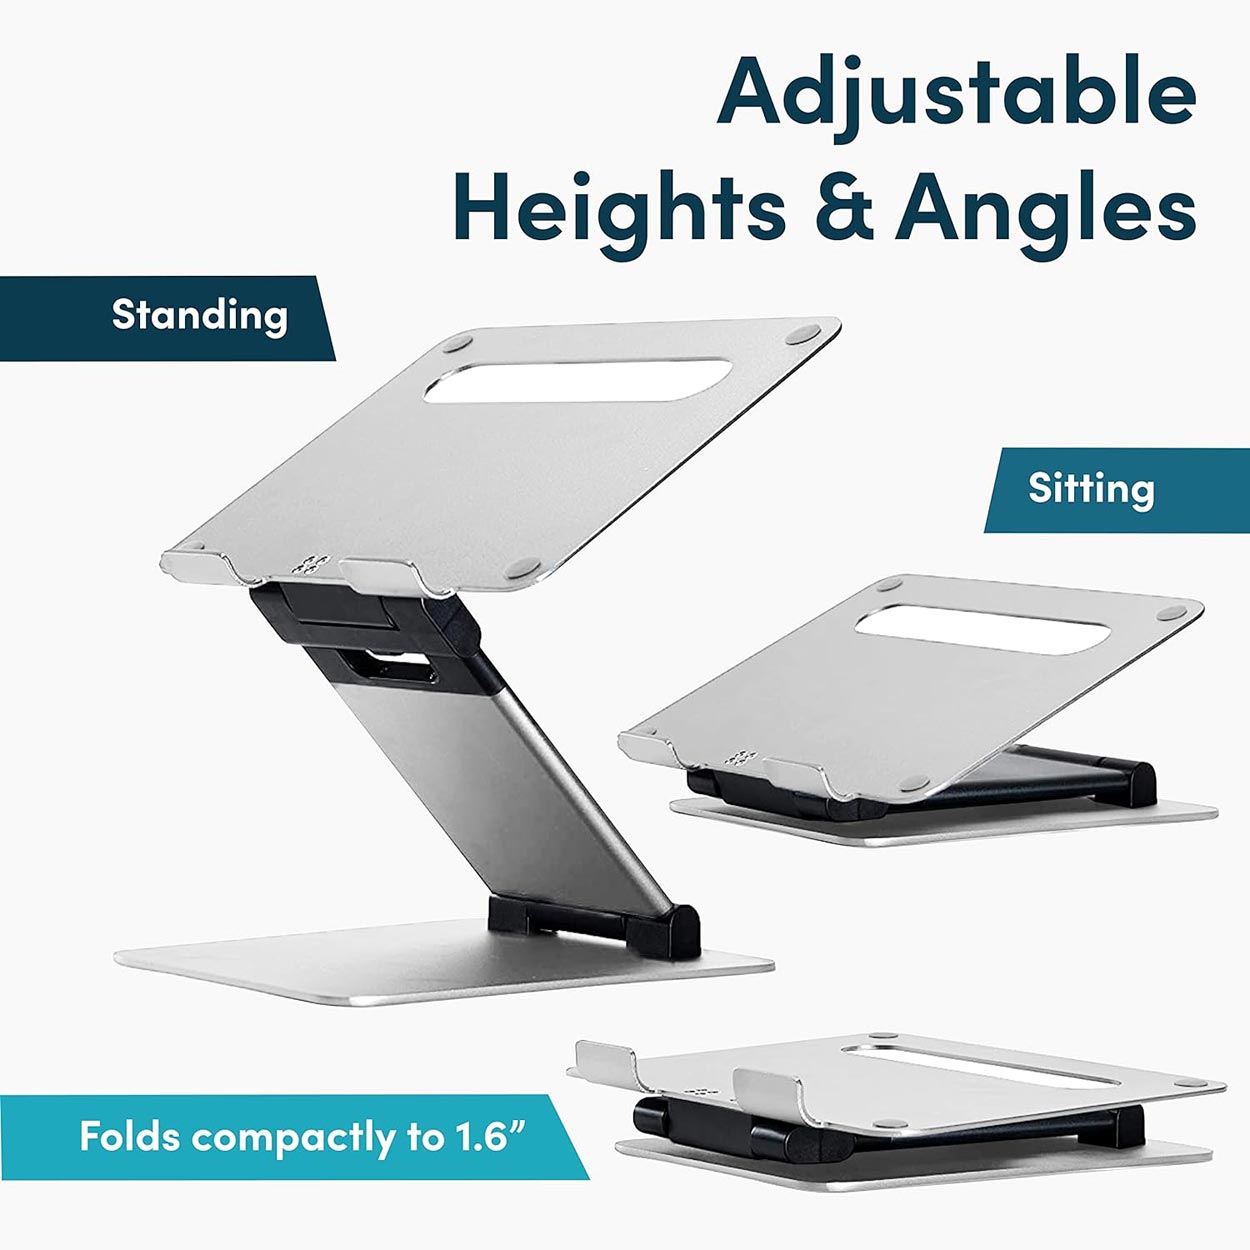 Ergonomic Laptop Stand with Adjustable Height - 4